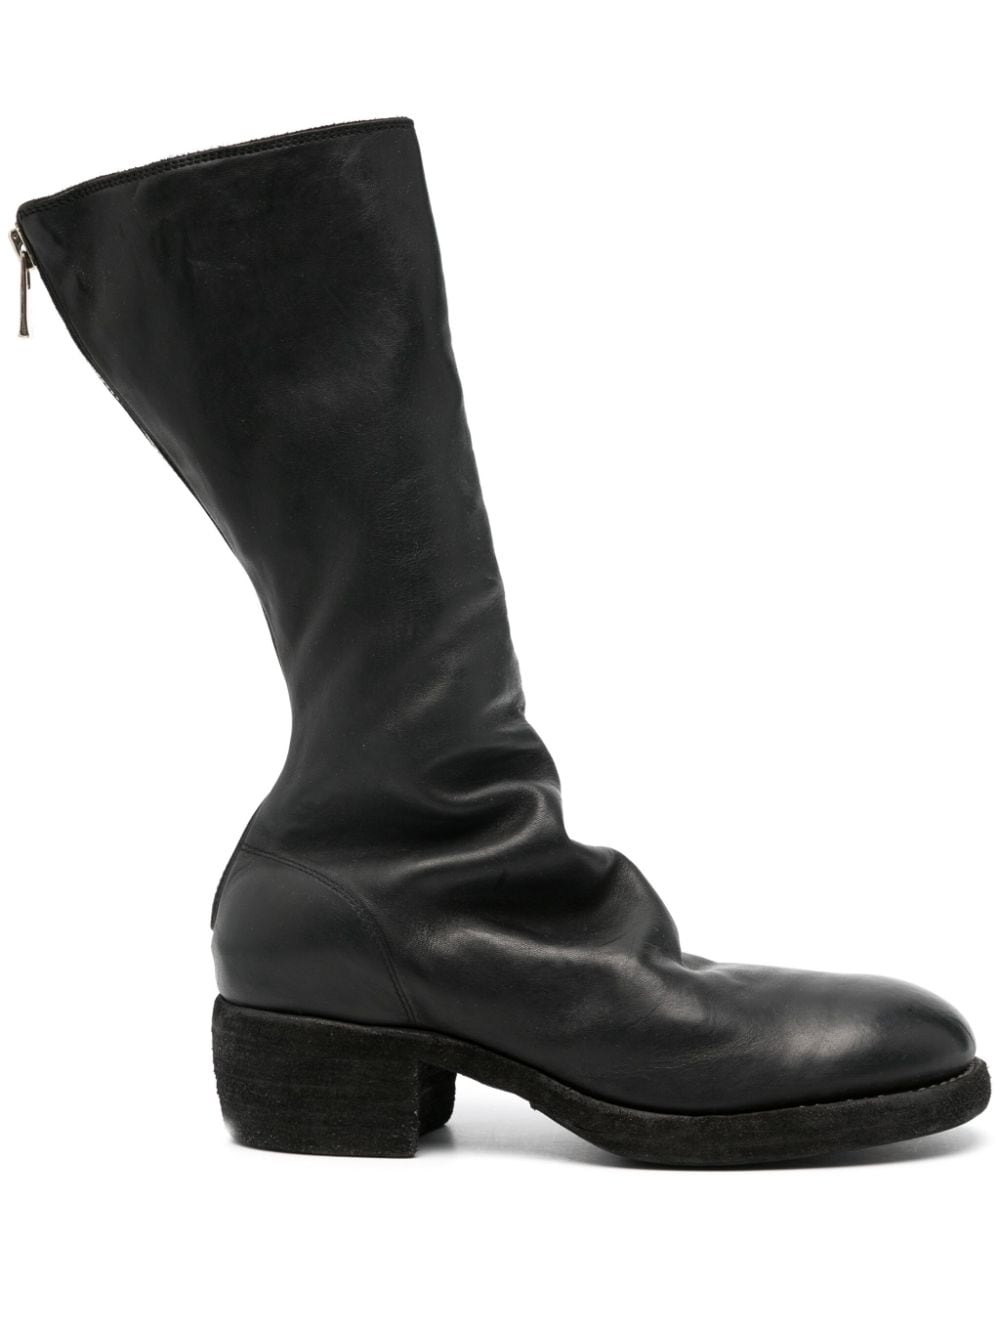 45mm leather boots - 1